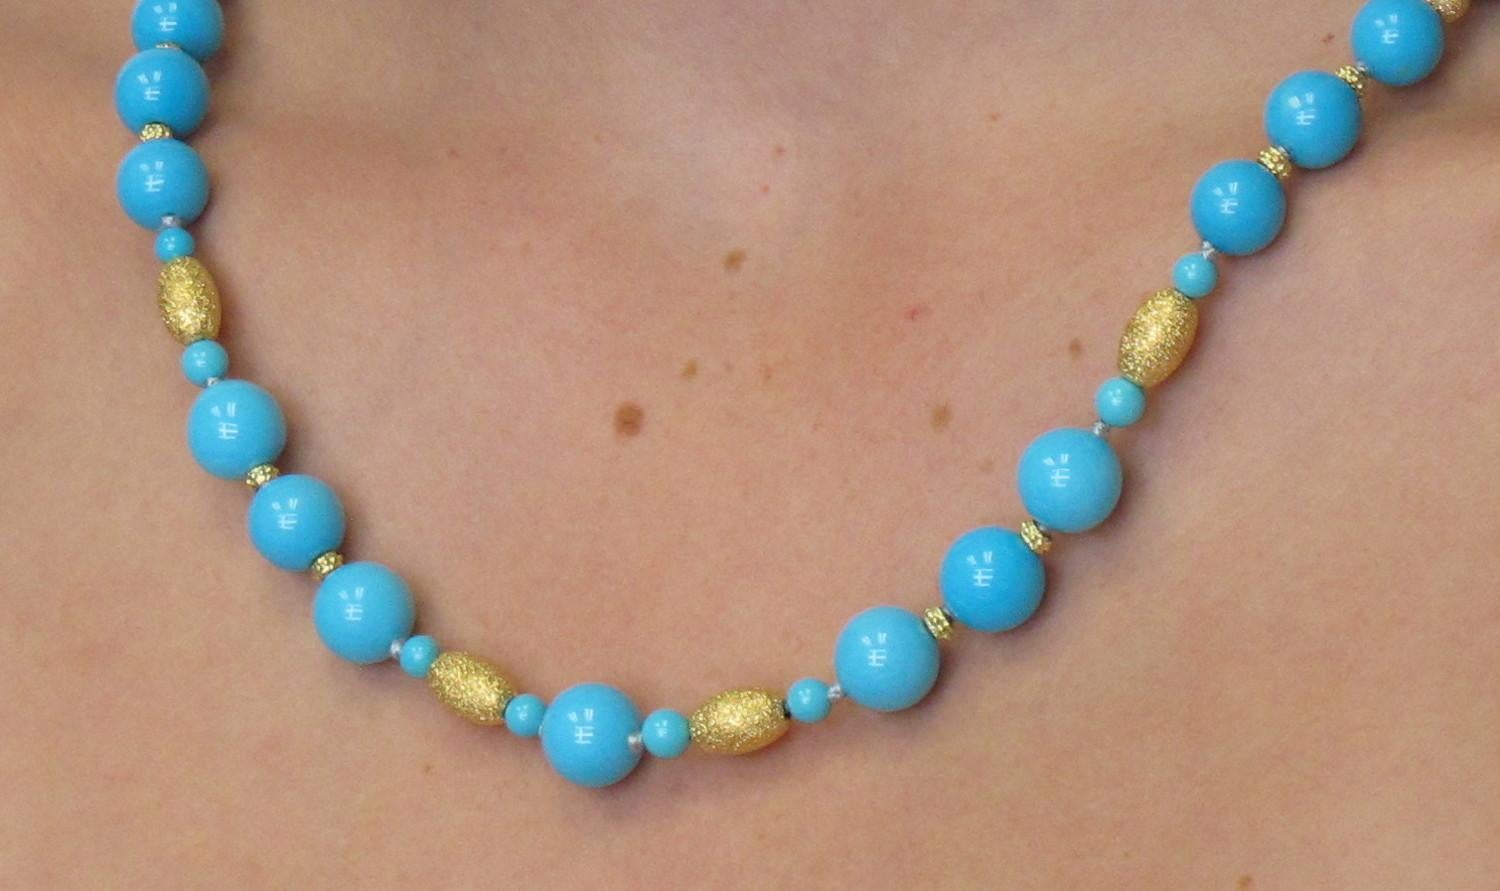 Turquoise from the Sleeping Beauty Mine is the best quality turquoise you can buy. This beautiful turquoise strand is quite rare and its' robin's-egg-blue color speaks for itself. The necklace is completed by the tasteful addition of 14K yellow gold